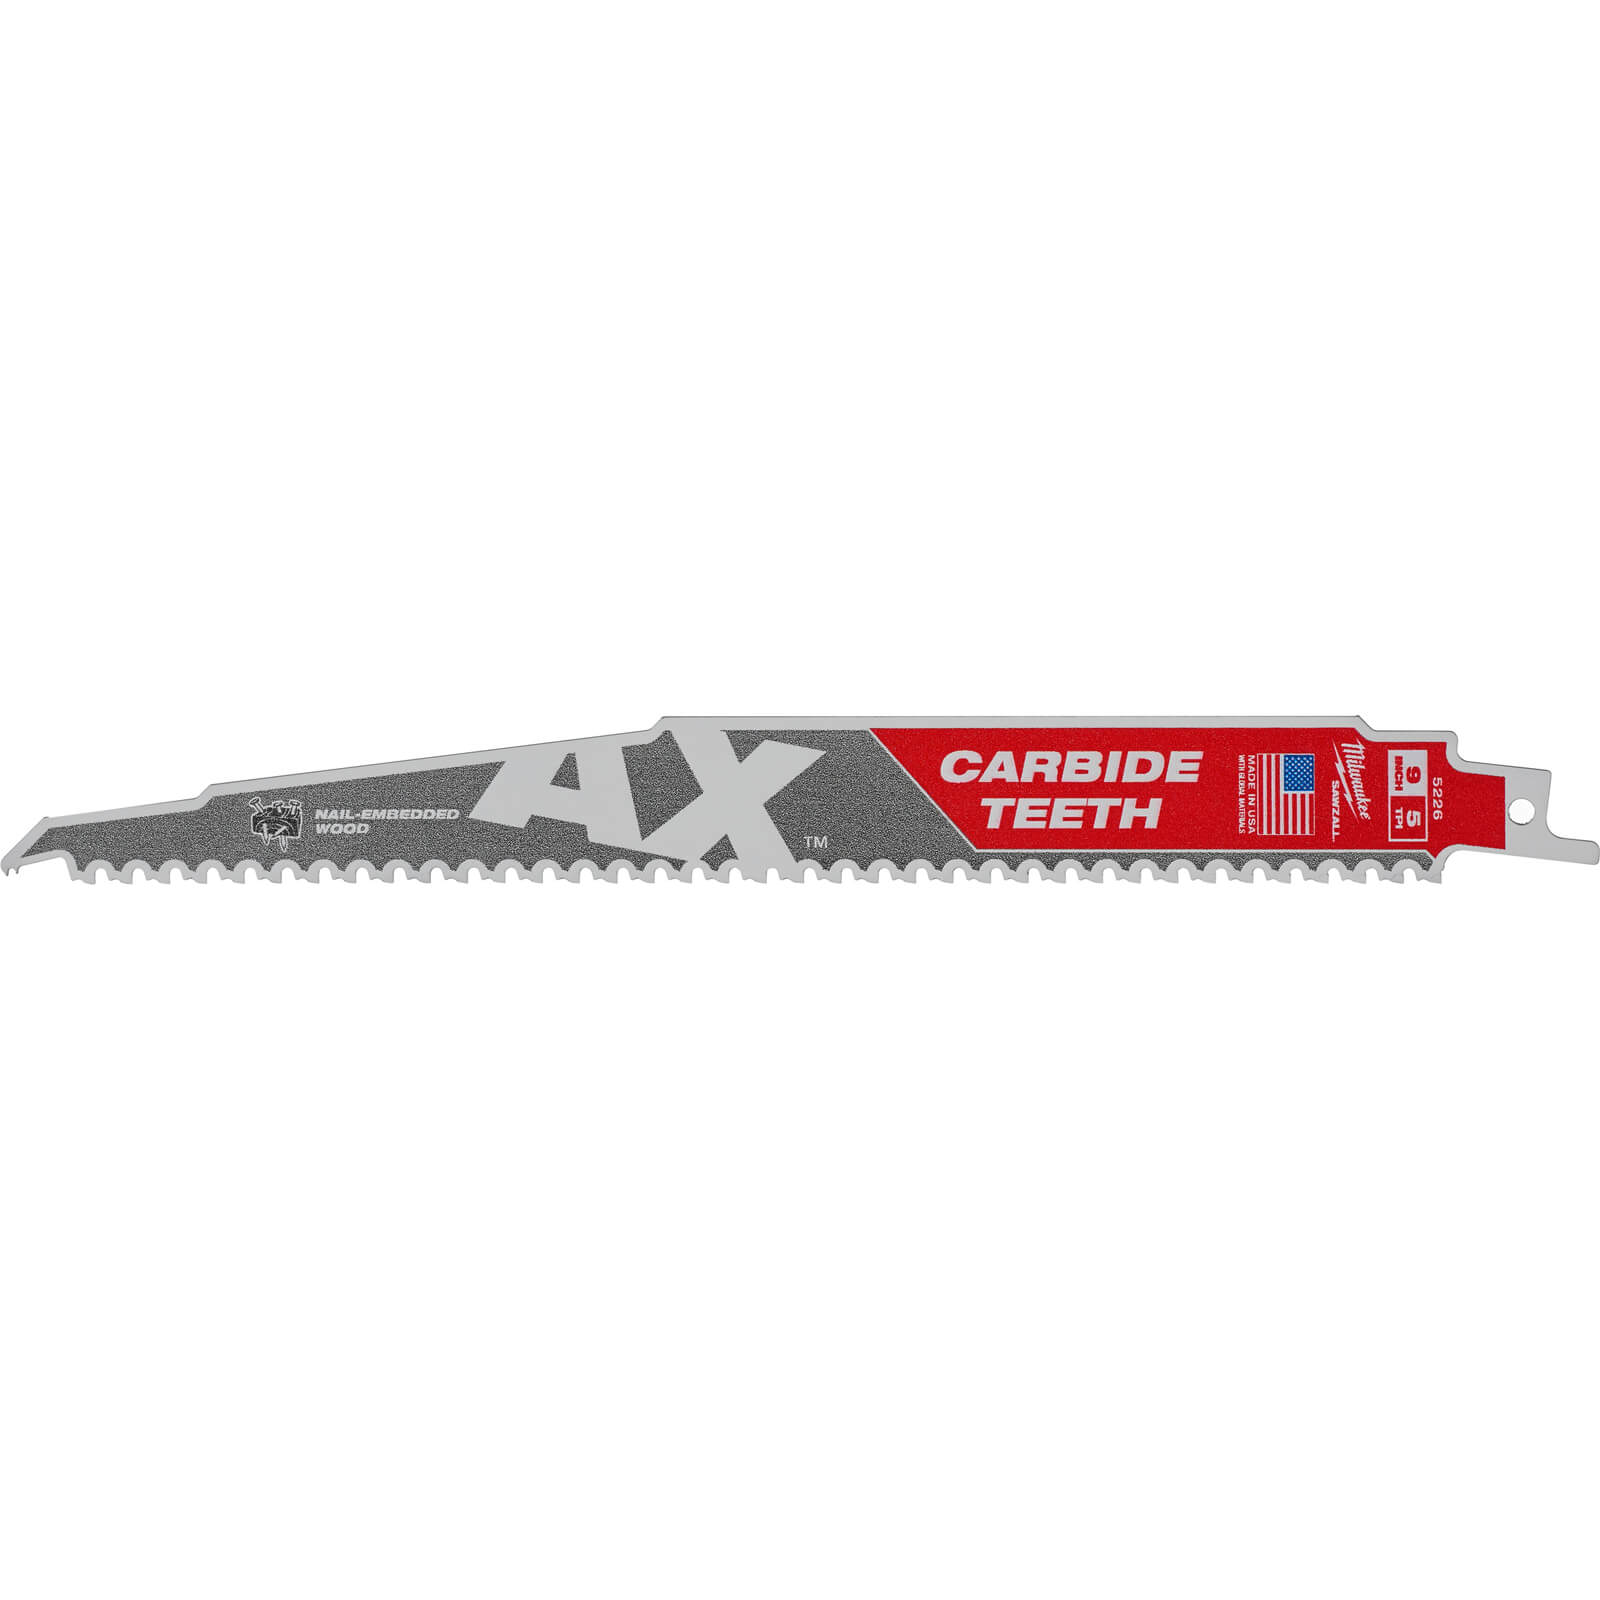 Image of Milwaukee Heavy Duty AX Carbide Demolition Reciprocating Sabre Saw Blades 230mm Pack of 1